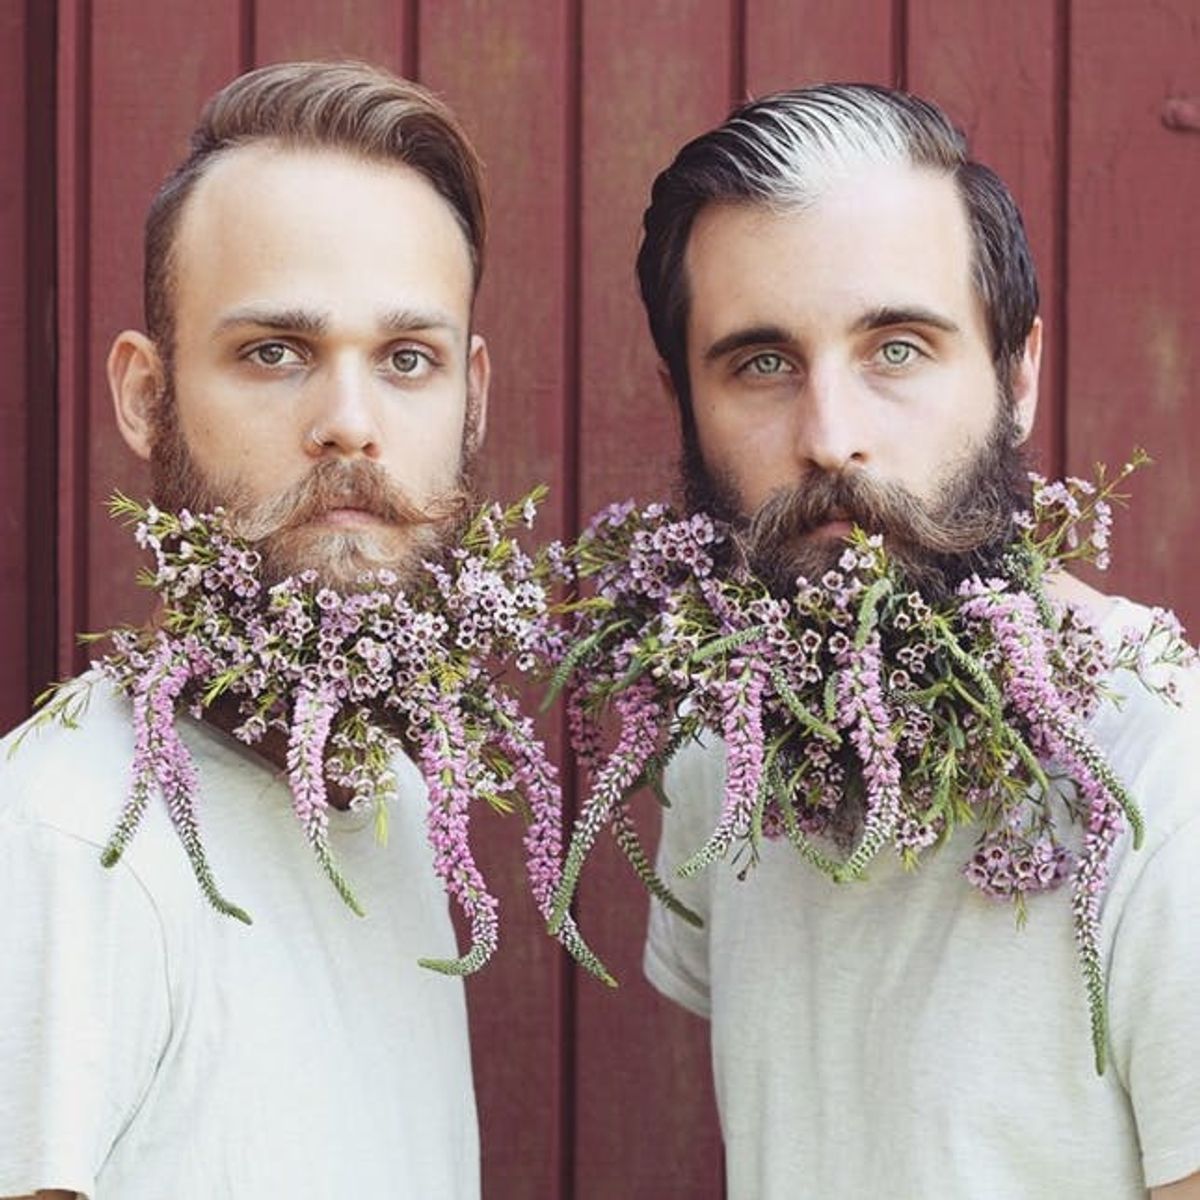 This Creative + Colorful Beard Duo Should Be Every Man’s Style Inspo